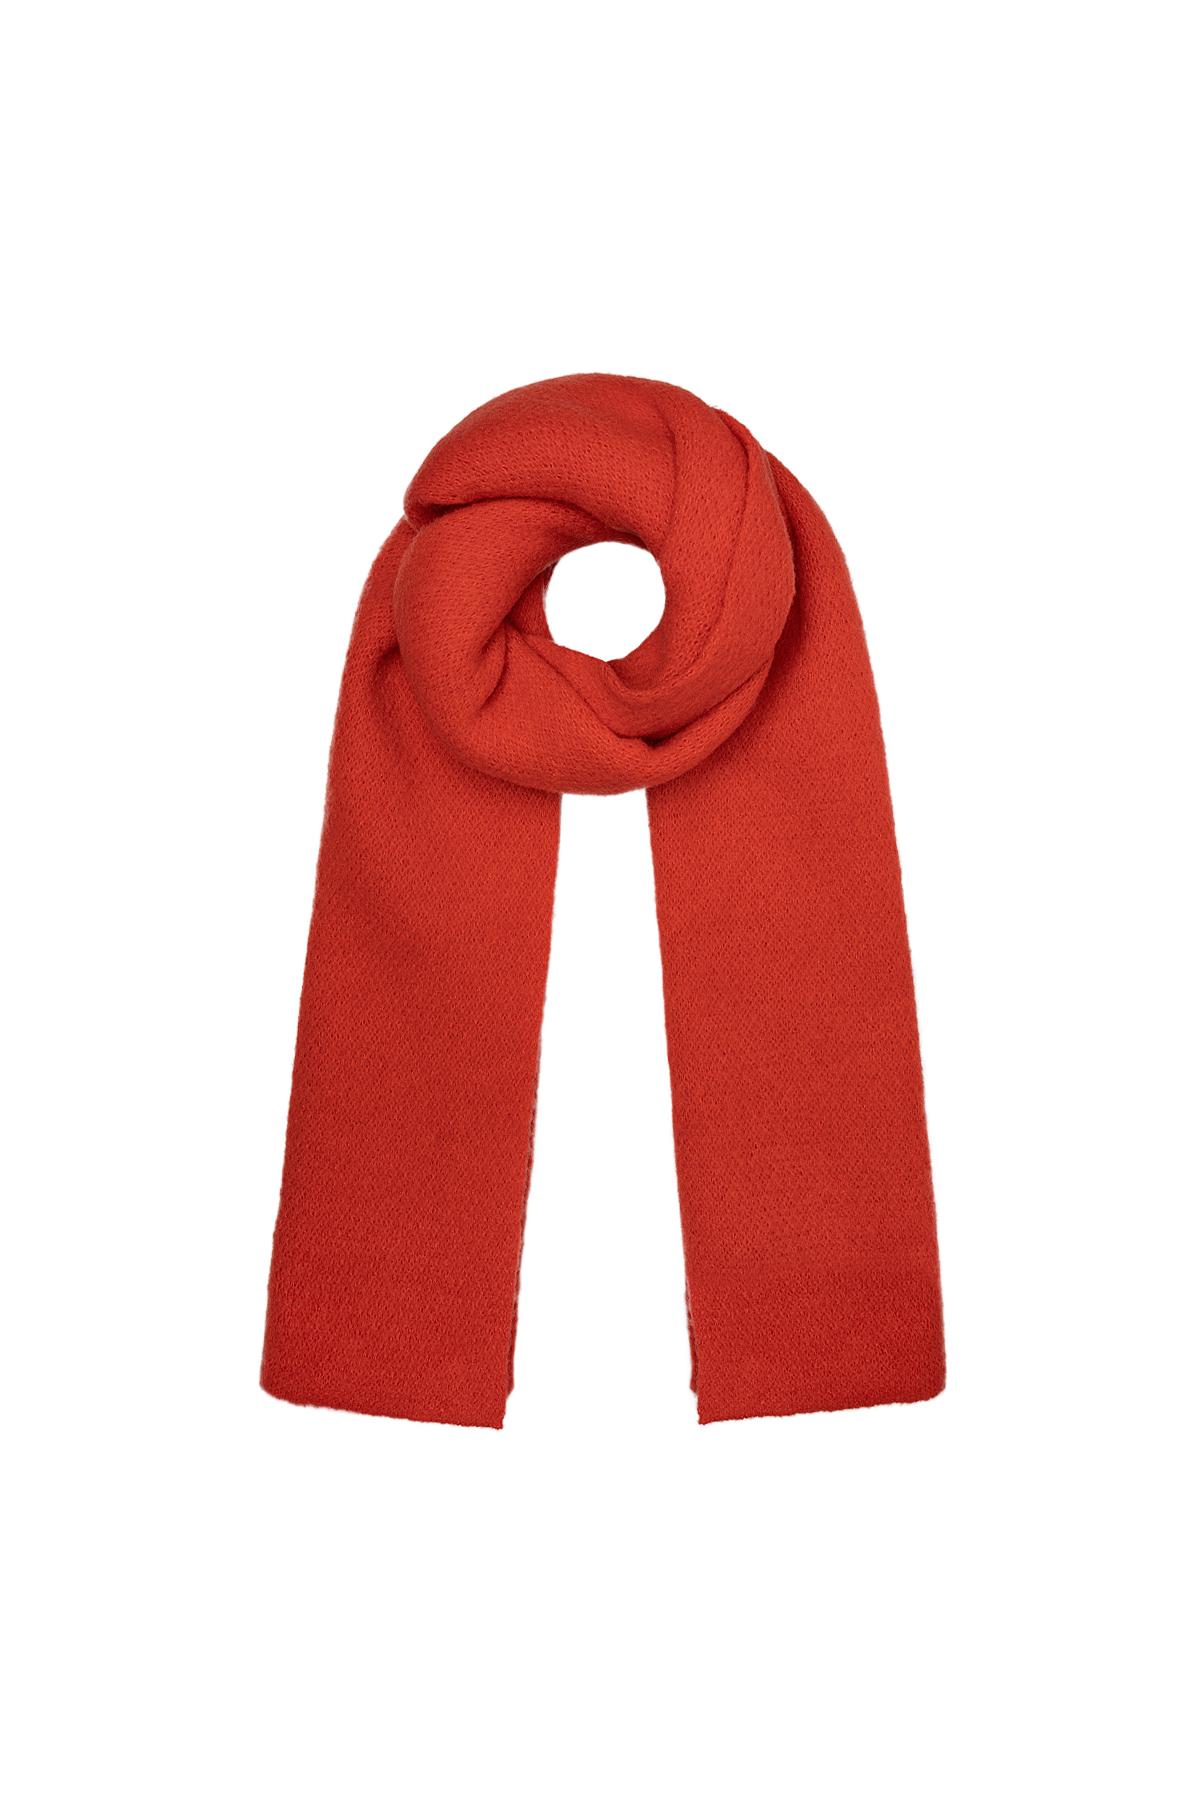 Soft winter scarf solid red Polyester h5 